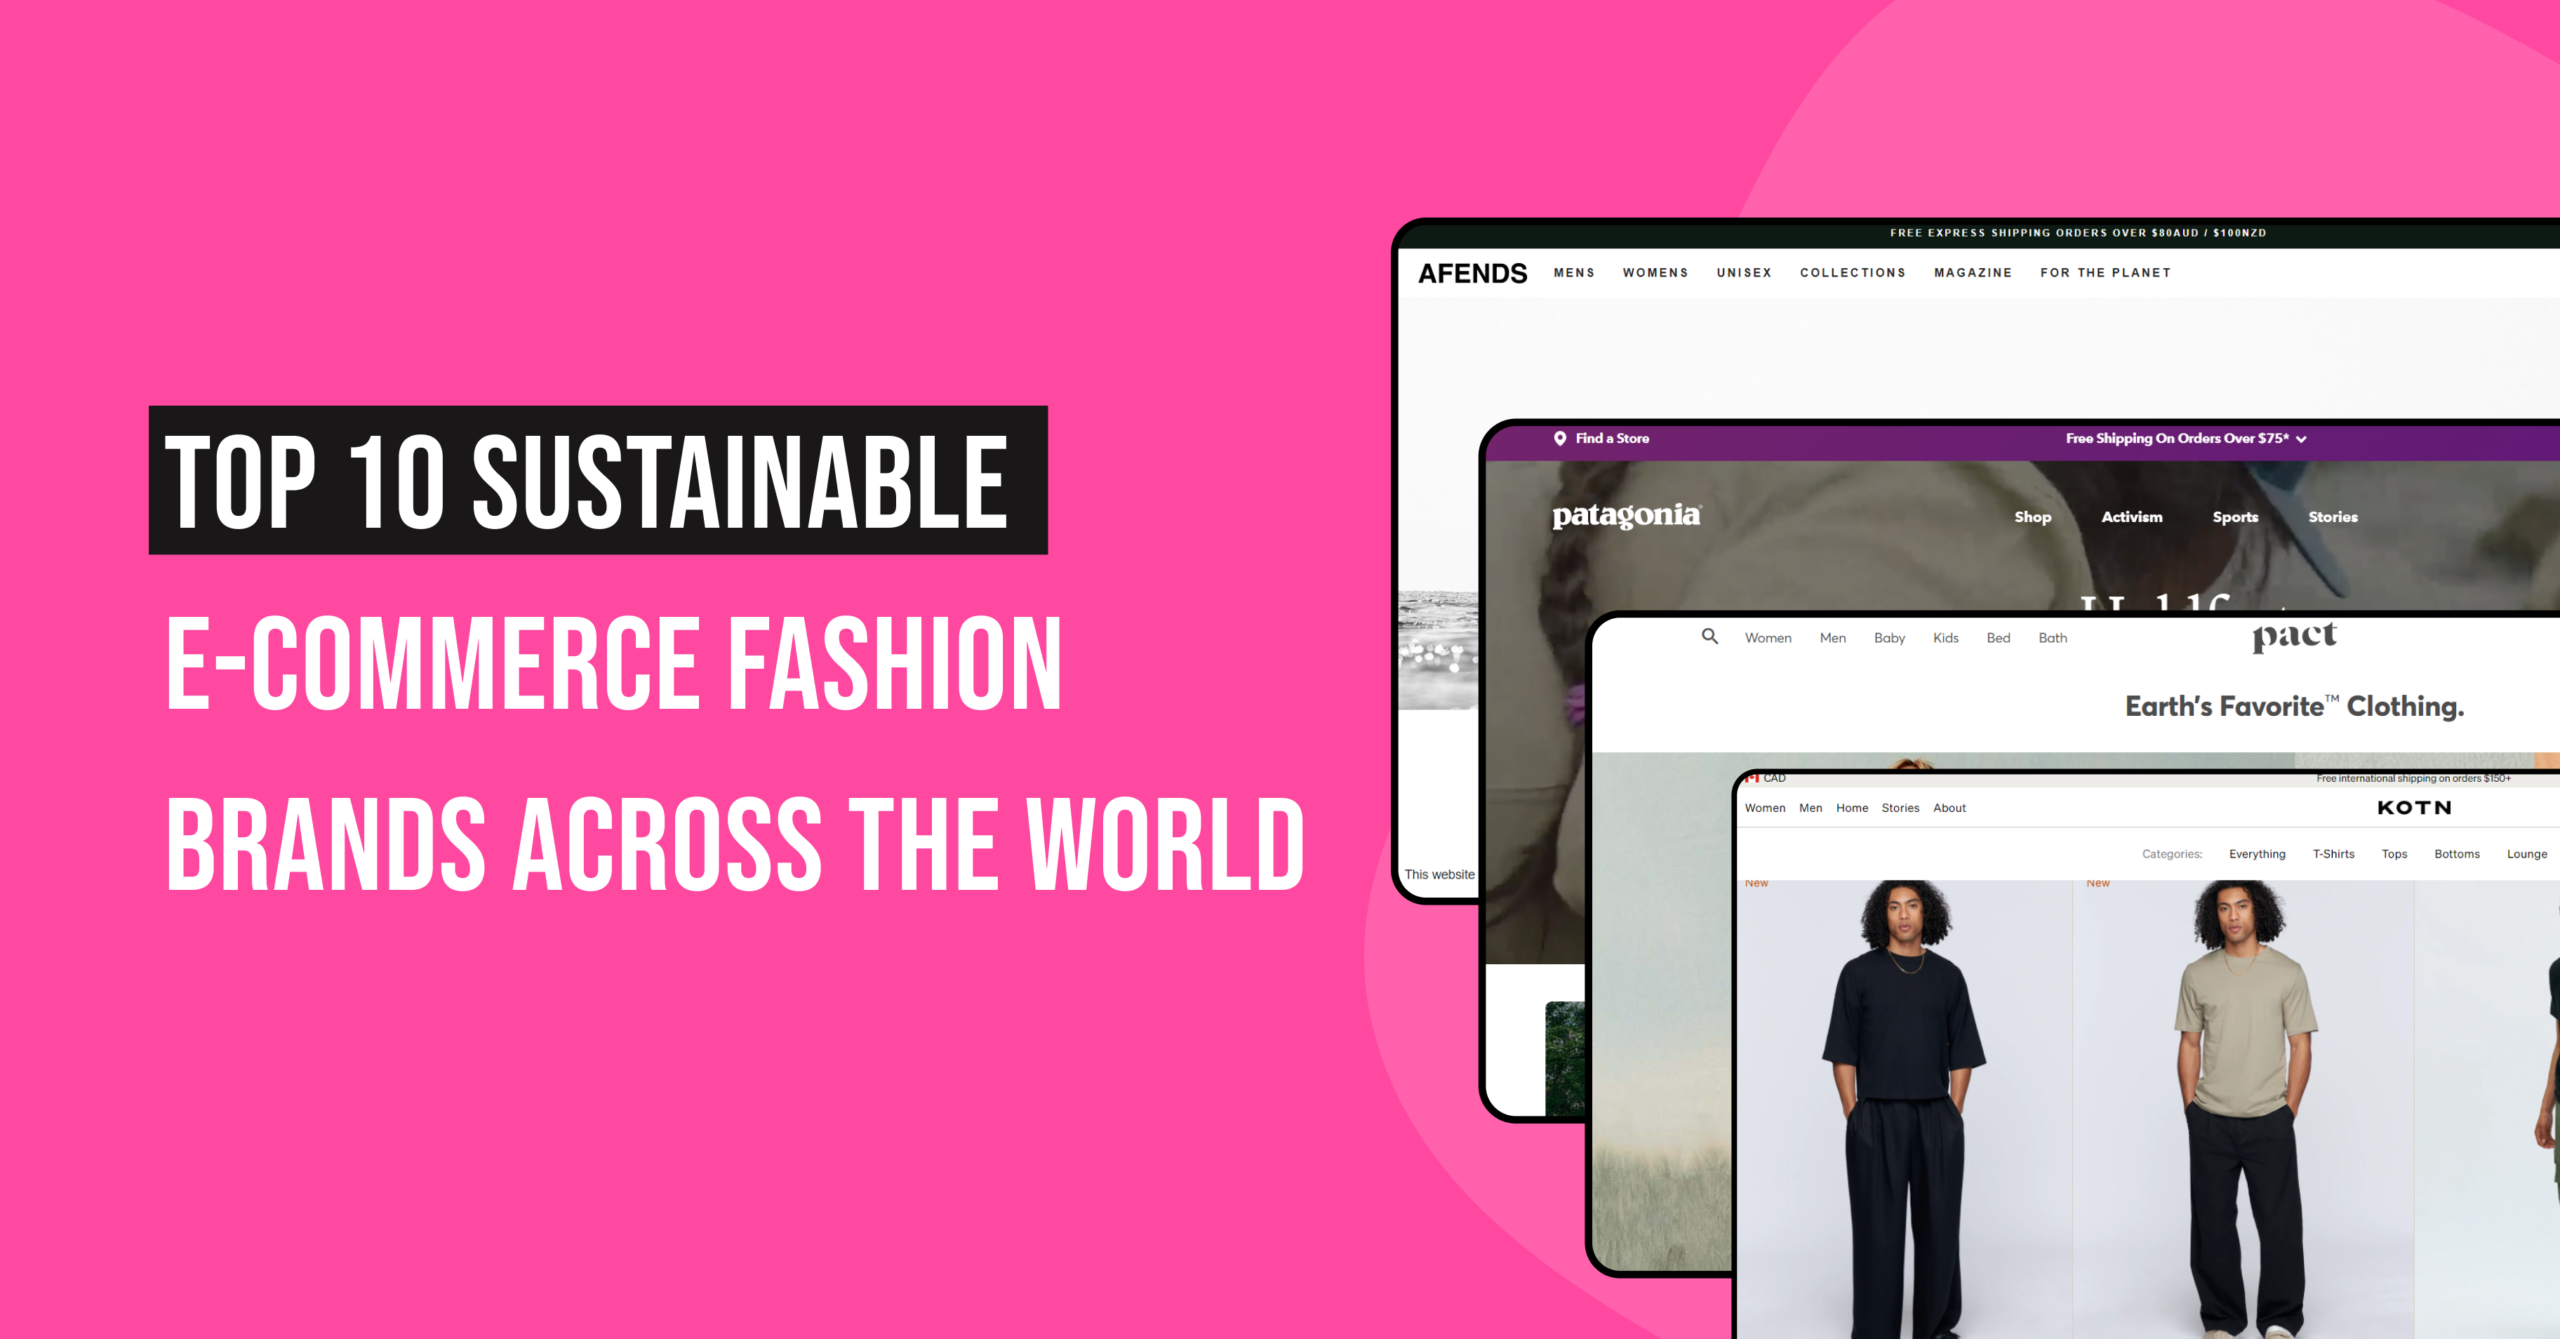 Top 10 sustainable E-commerce fashion brands across the world